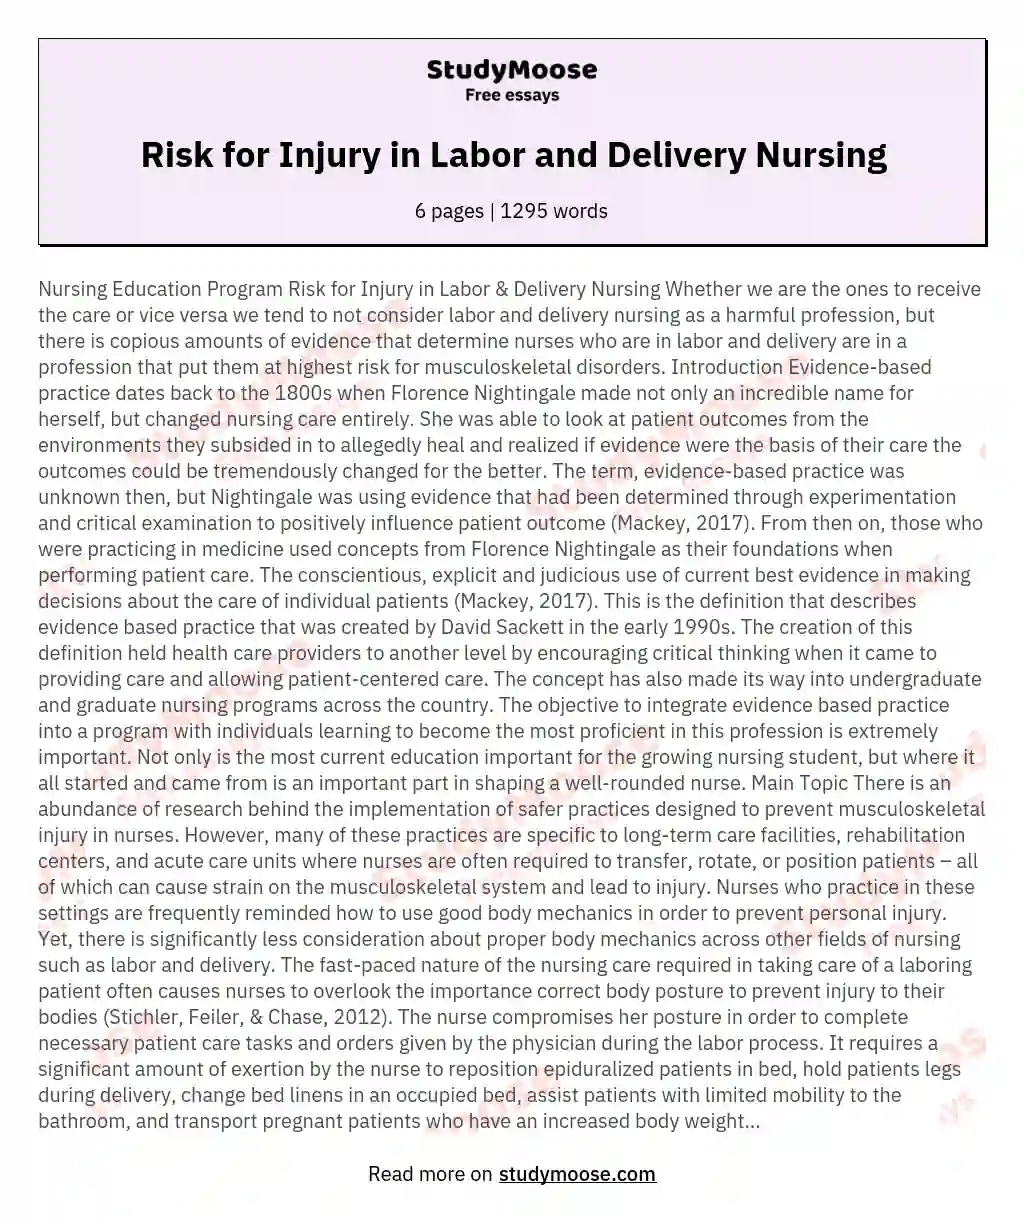 Risk for Injury in Labor and Delivery Nursing essay